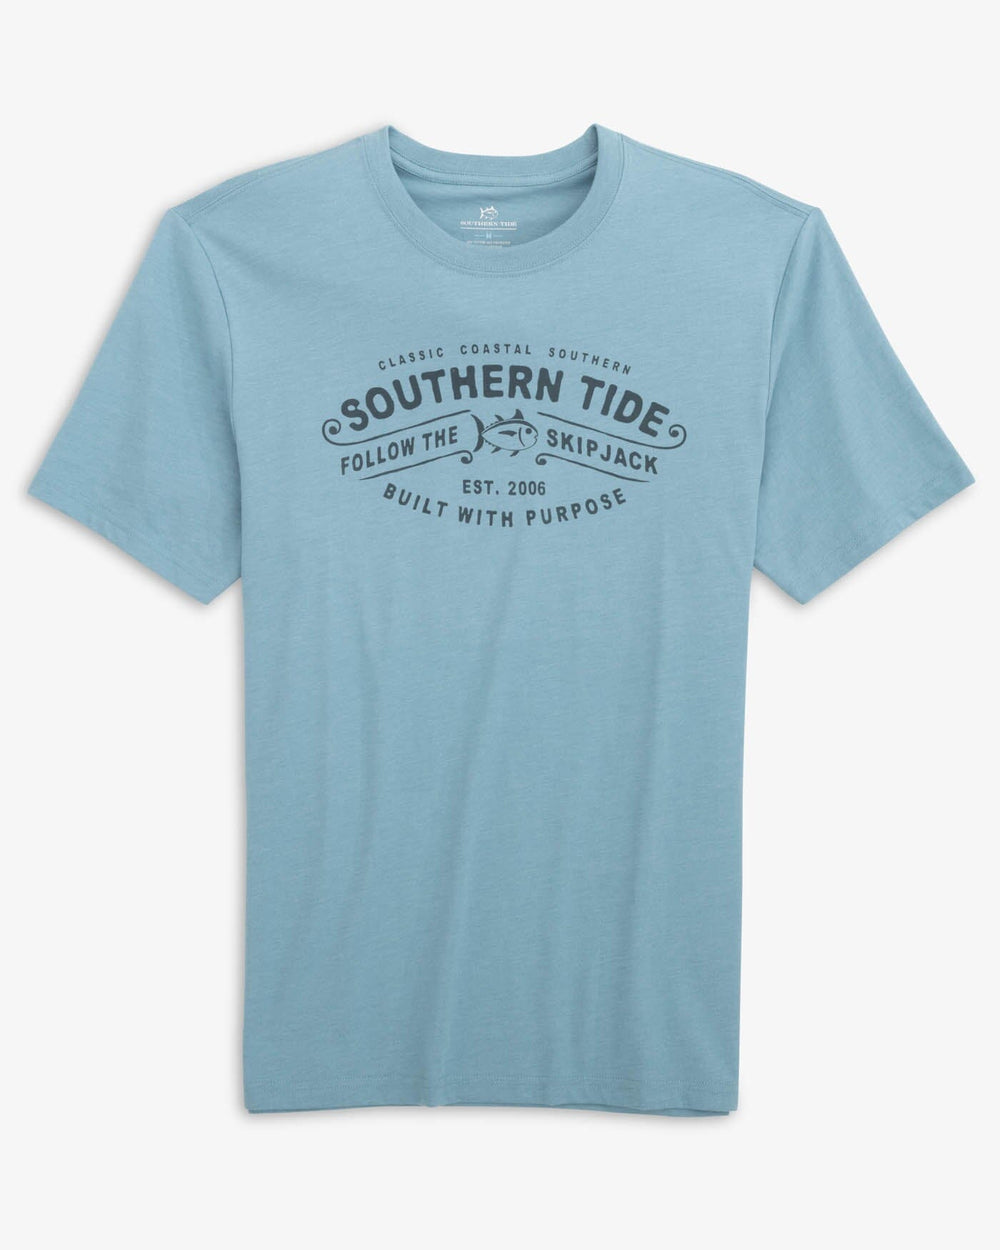 The front view of the Southern Tide Heather Follow The Skipjack T-Shirt by Southern Tide - Heather Blue Shadow